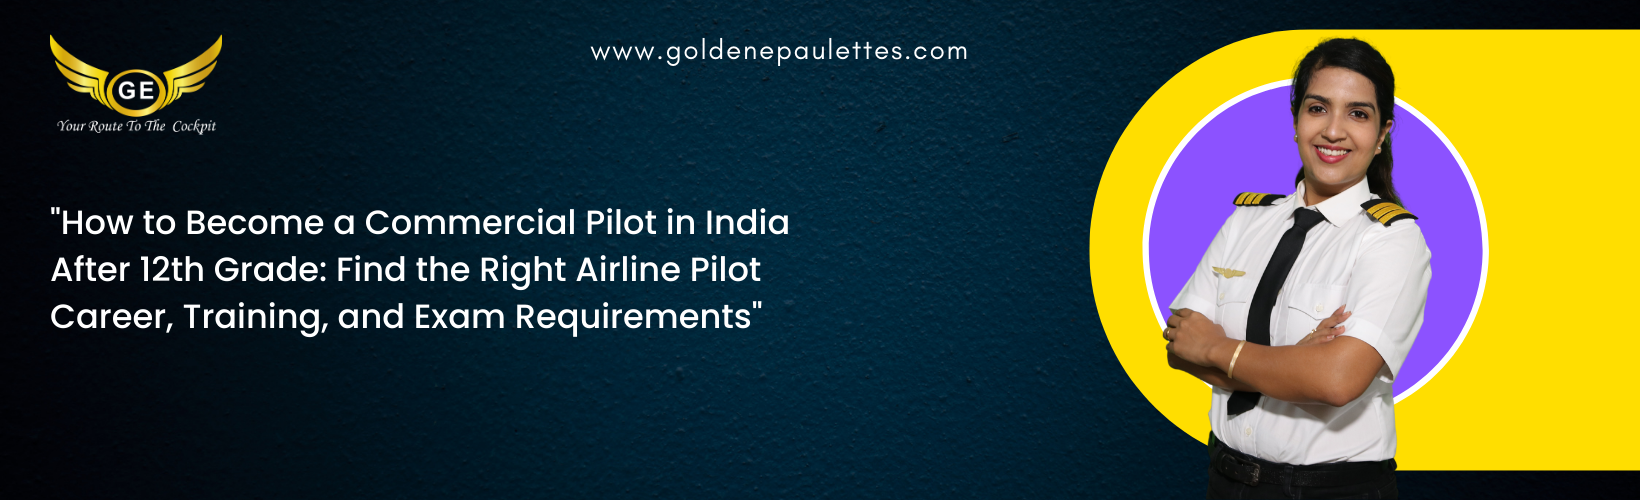 How to Find the Right Airline After 12th in India to Become a Commercial Pilot